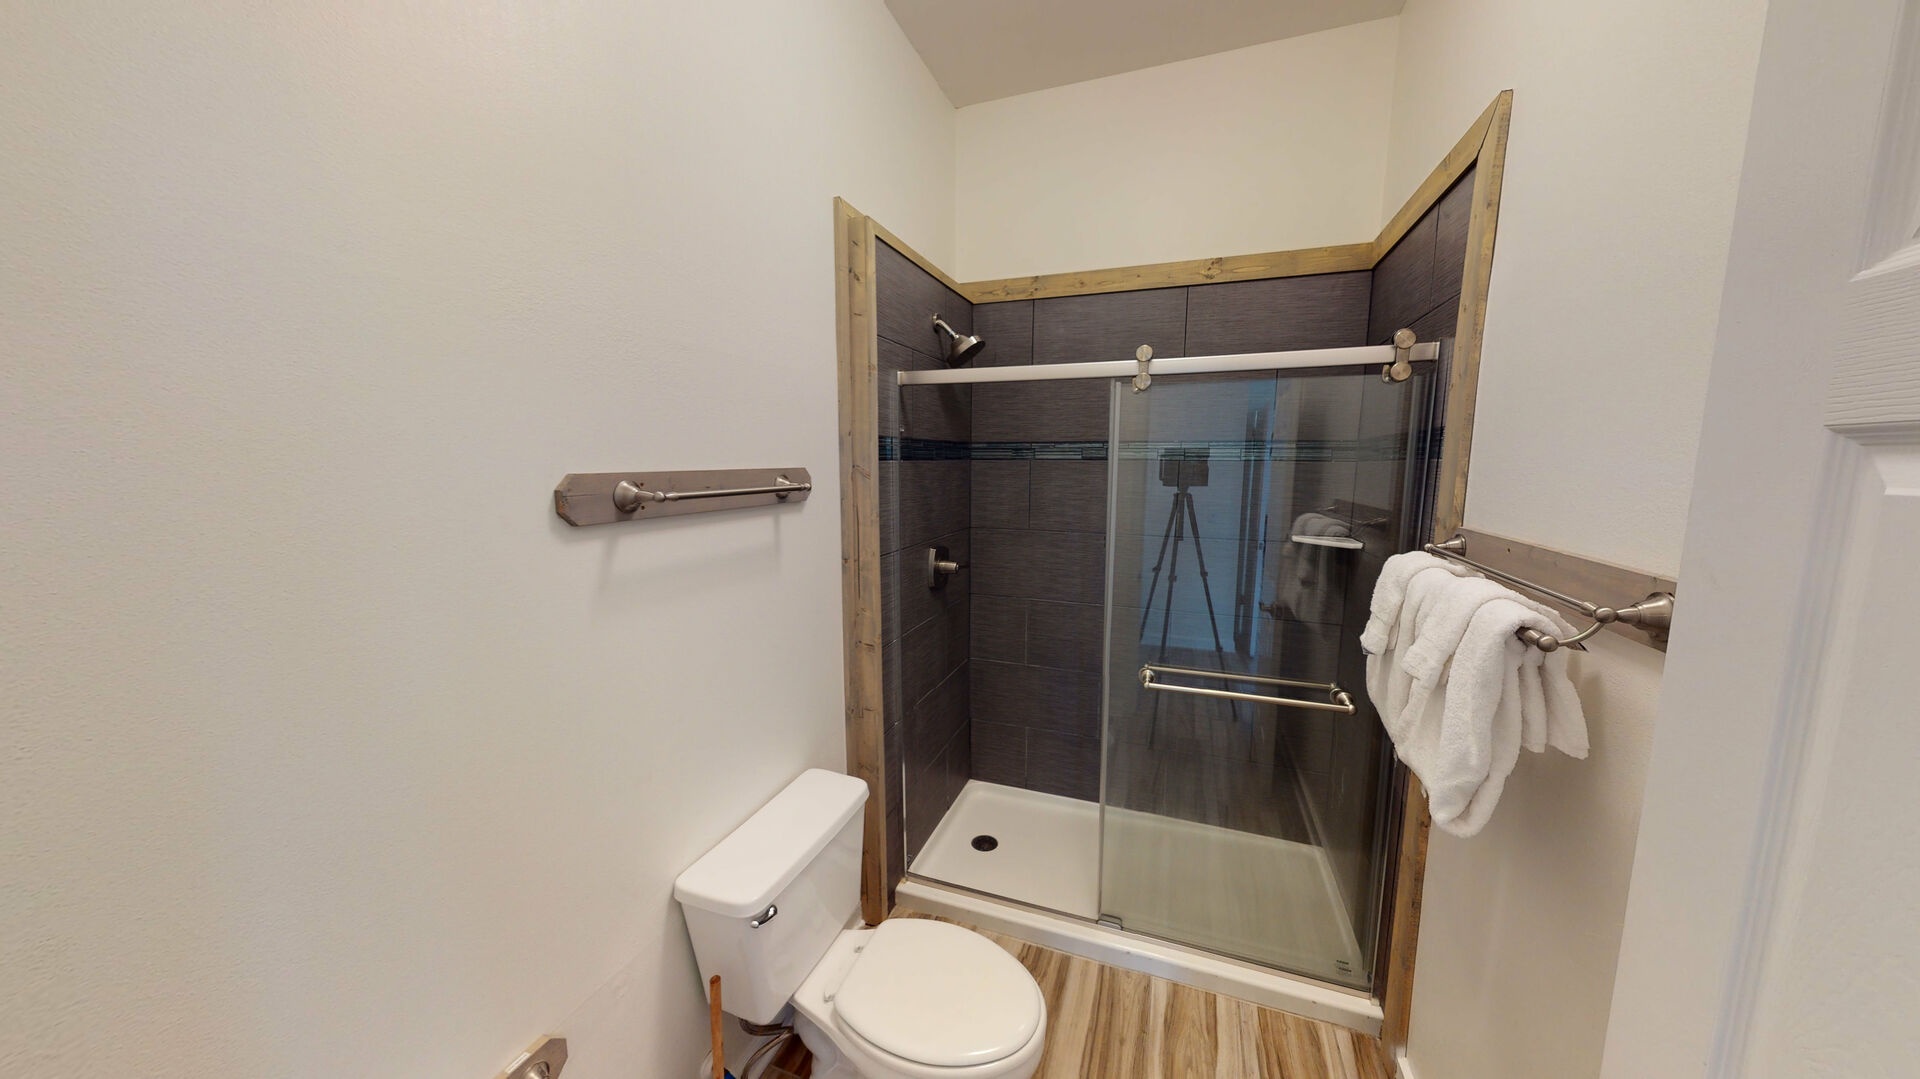 There is a walk-in shower in the bathroom for bedroom #3